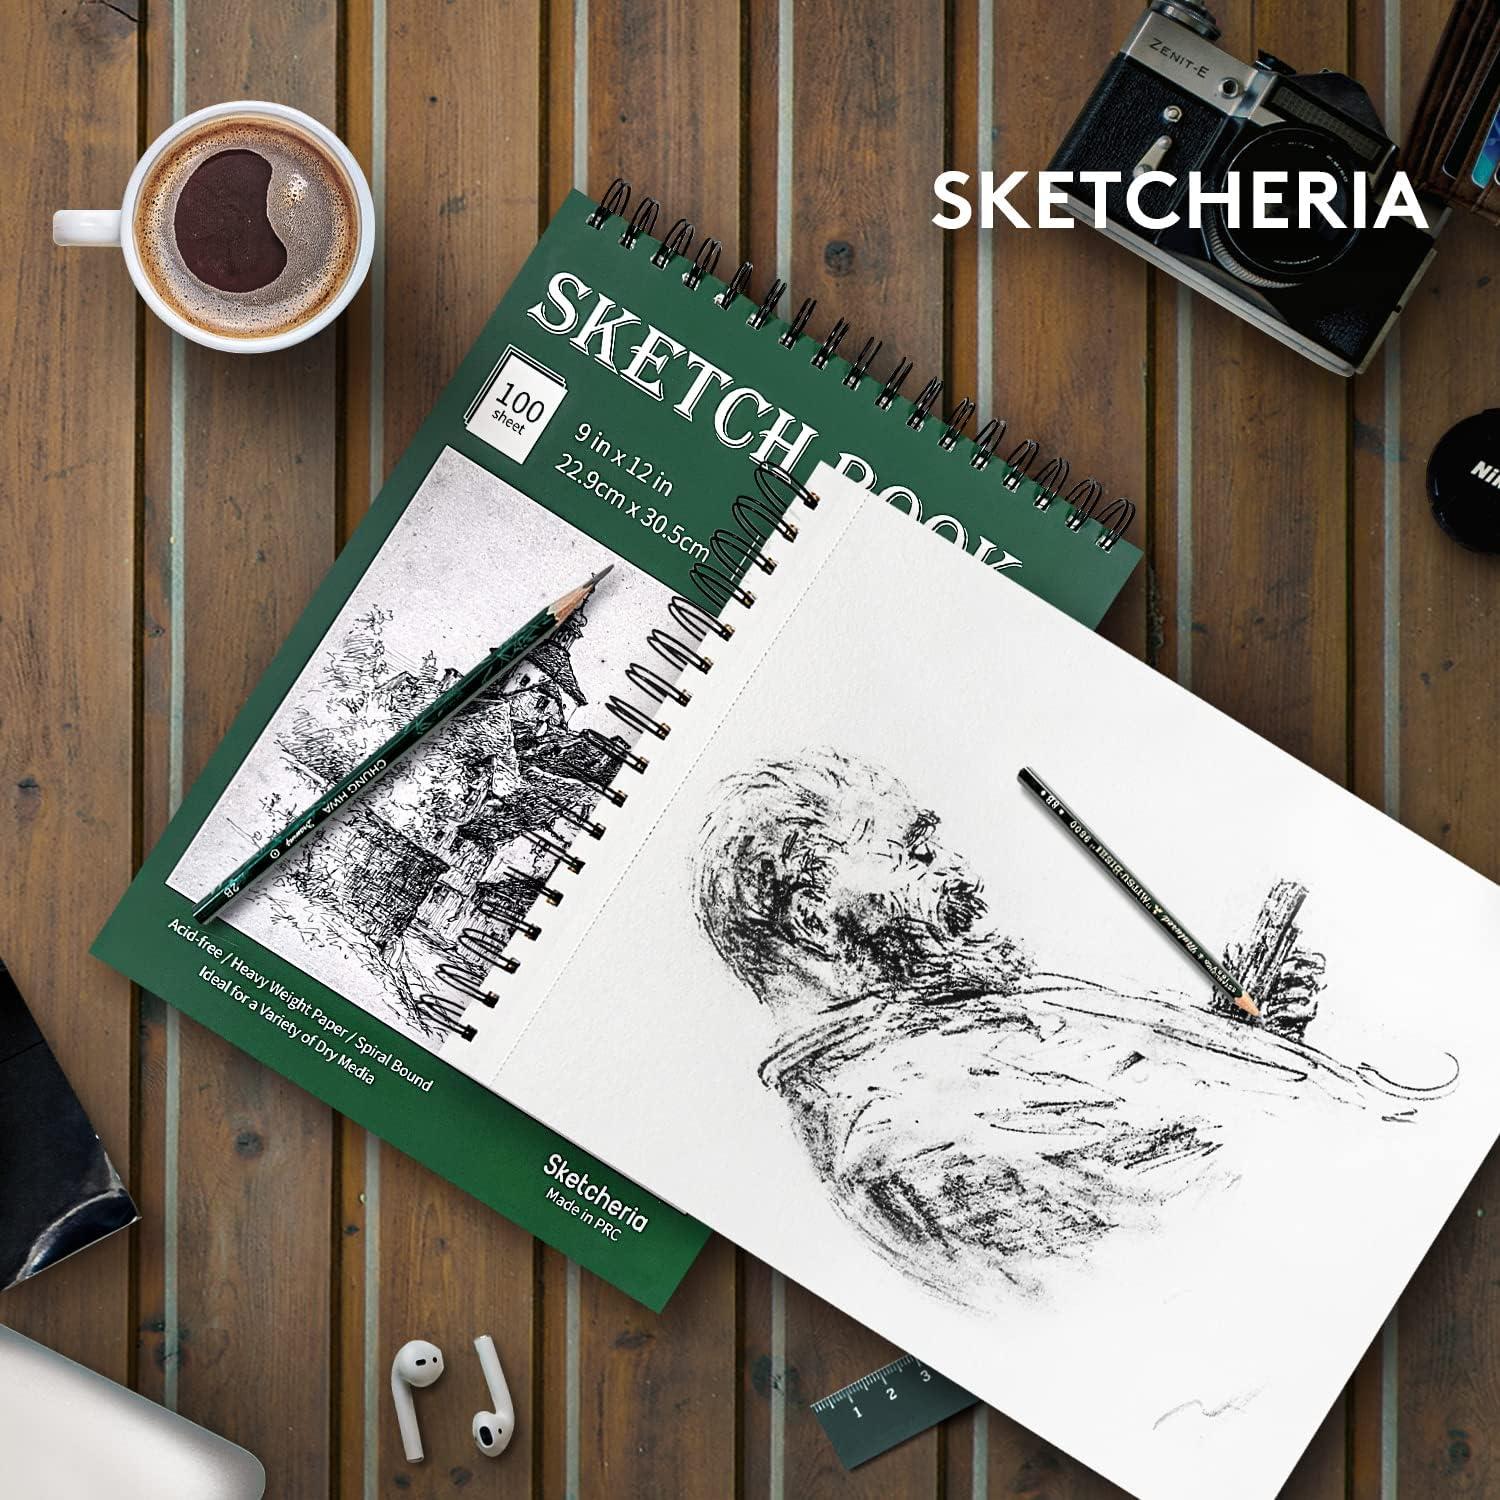  The Maker of Sketchpad